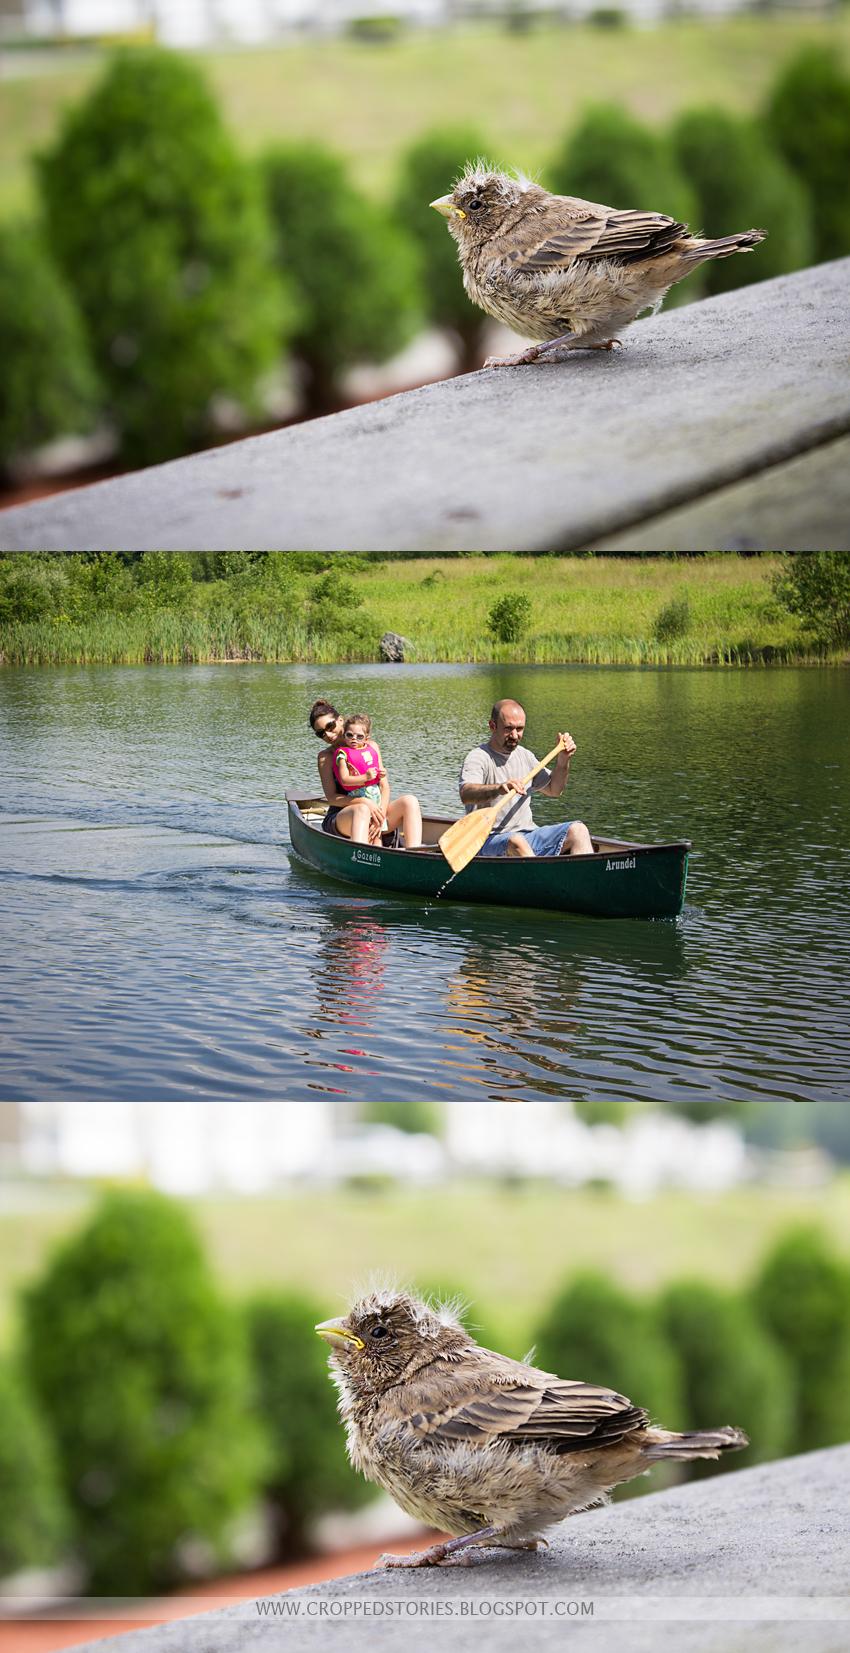 BABY BIRD and CANOE RIDE COLLAGE